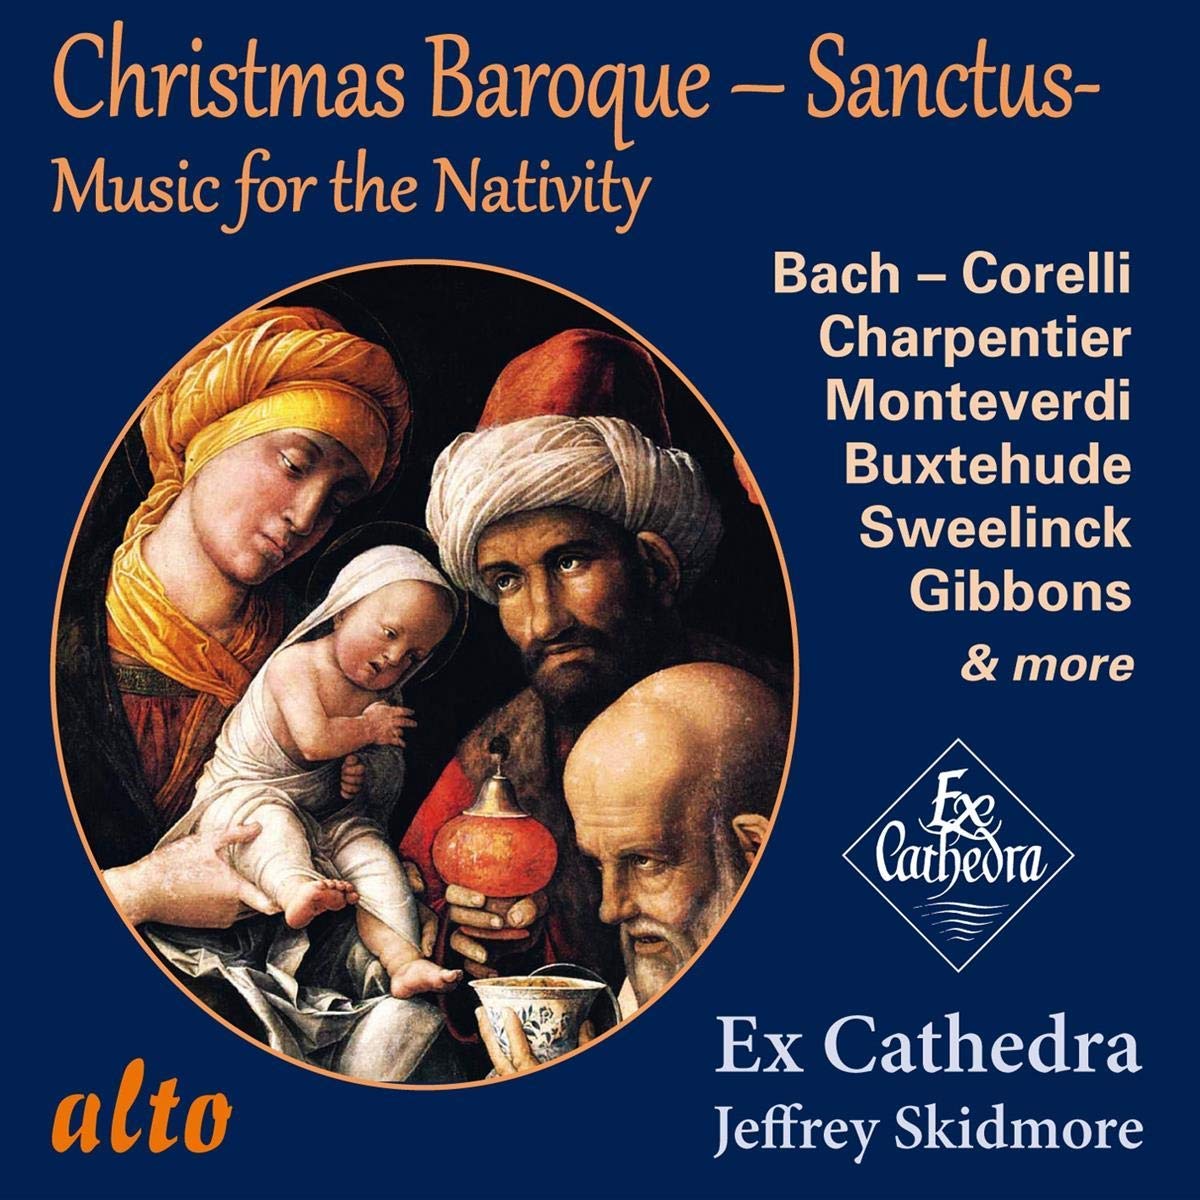 CHRISTMAS BAROQUE SANCTUS: MUSIC FOR THE NATIVITY - EX CATHEDRA